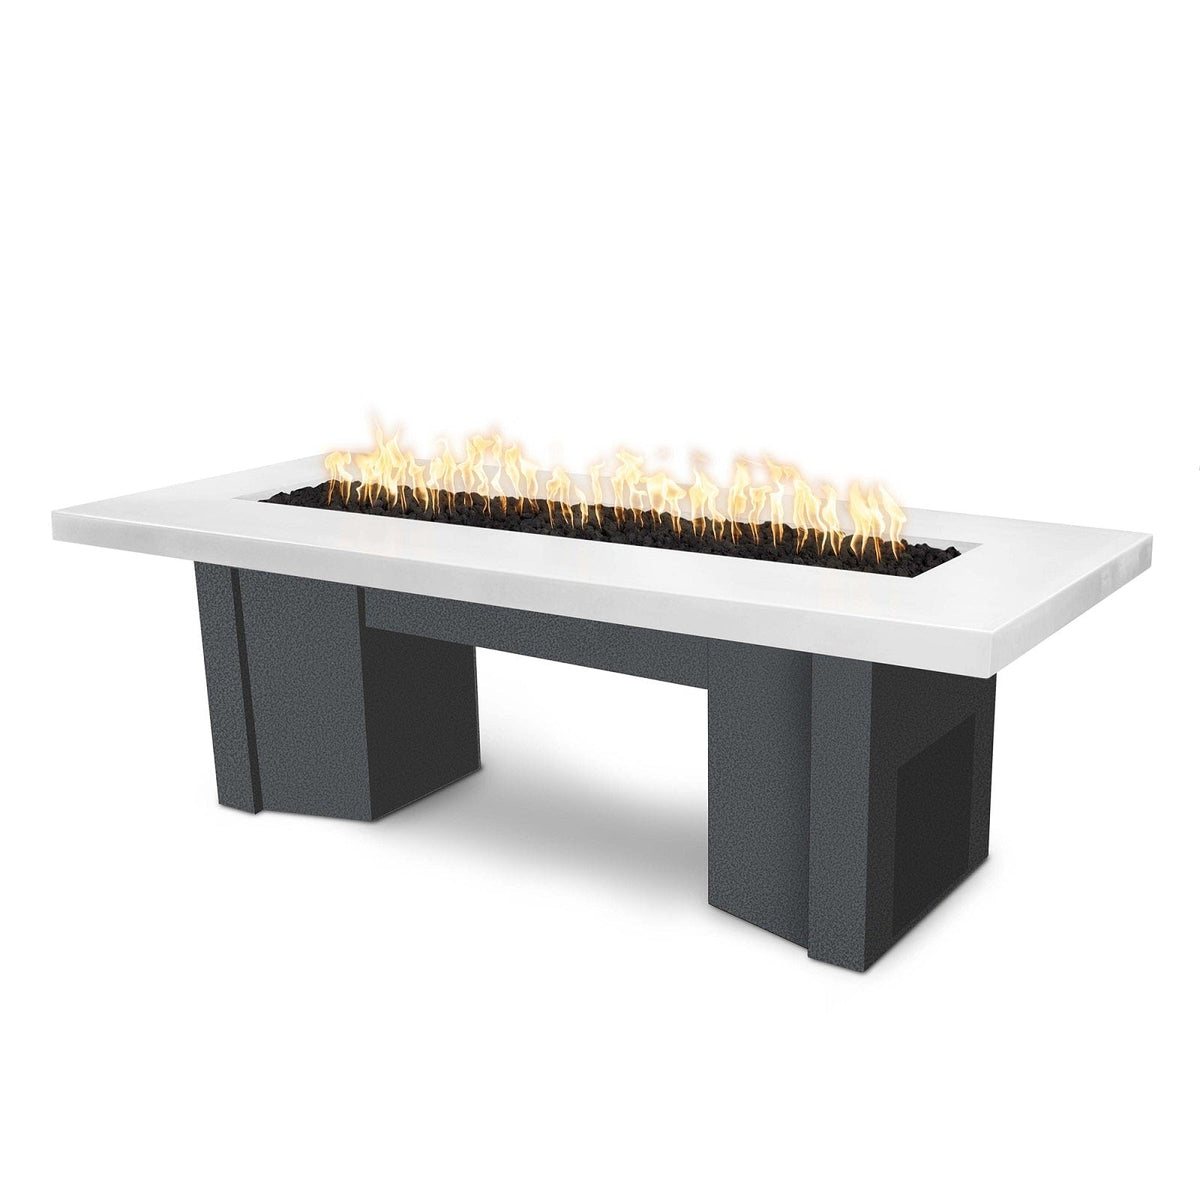 The Outdoor Plus Fire Features Limestone (-LIM) / Silver Vein Powder Coated Steel (-SLV) The Outdoor Plus 78&quot; Alameda Fire Table Smooth Concrete in Natural Gas - 110V Plug &amp; Play Electronic Ignition / OPT-ALMGFRC78EKIT-NG